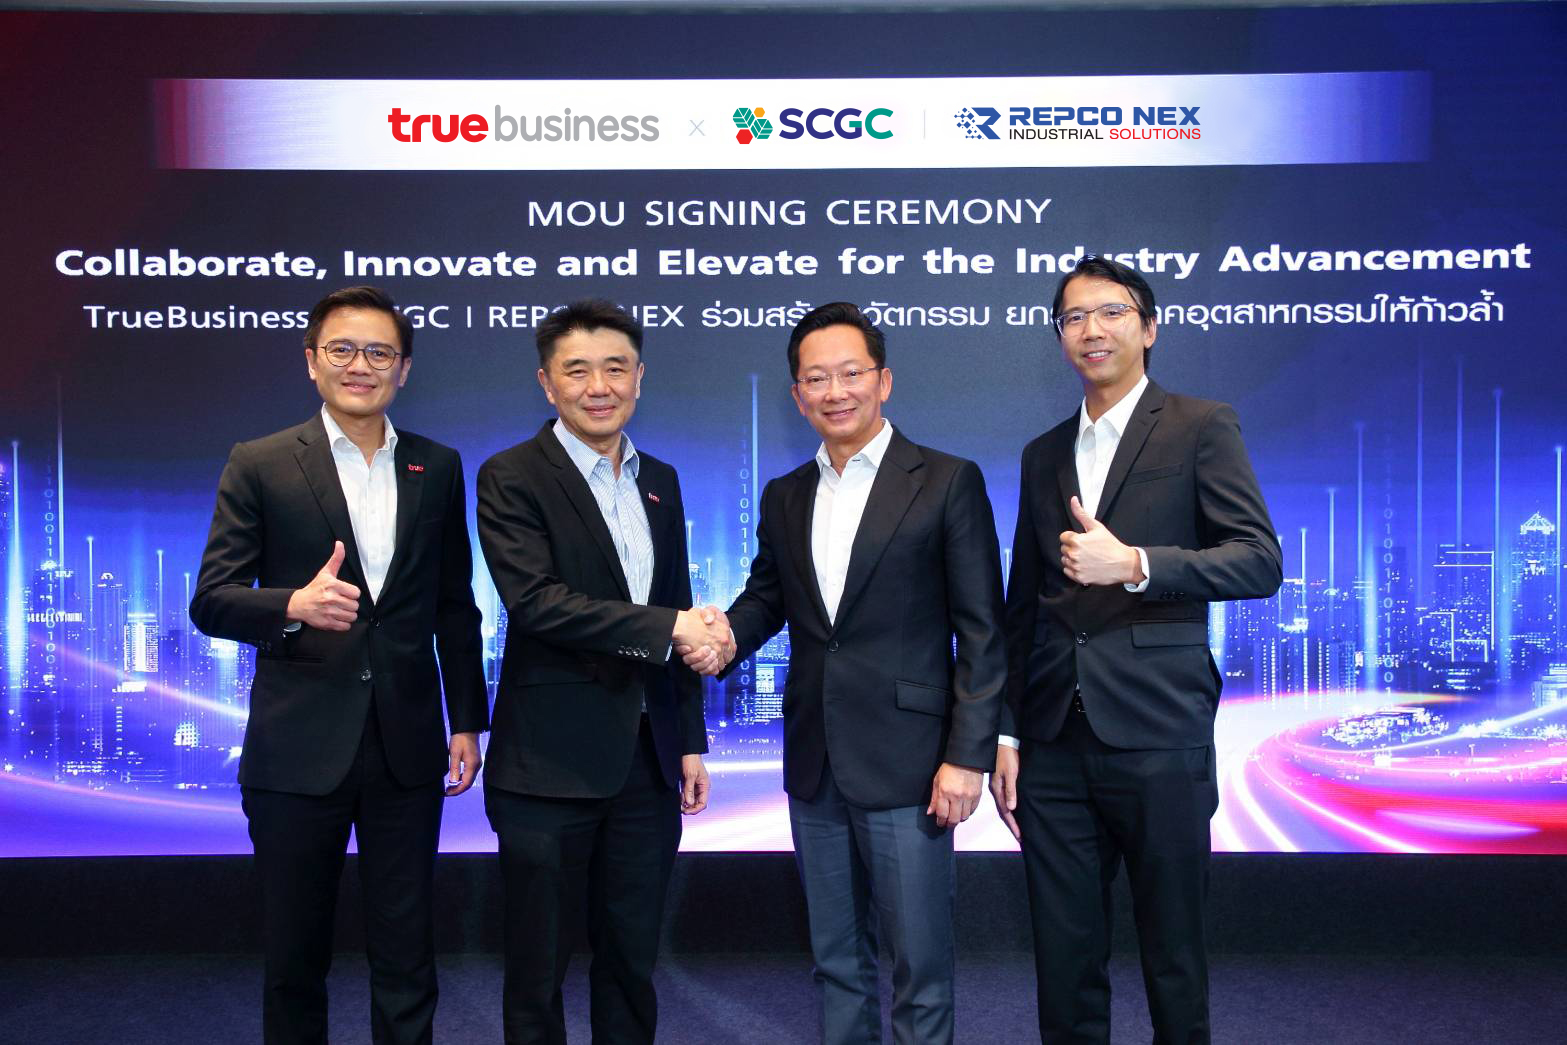 Joined Forces to Elevate the Sector to Industry 4.0 TrueBusiness Collaborates with REPCO NEX to Deliver Innovative Industrial Solutions  with an Integrated End-to-End Service, Transforming Manufacturing Industry  and Accelerating to Full Digital Transform